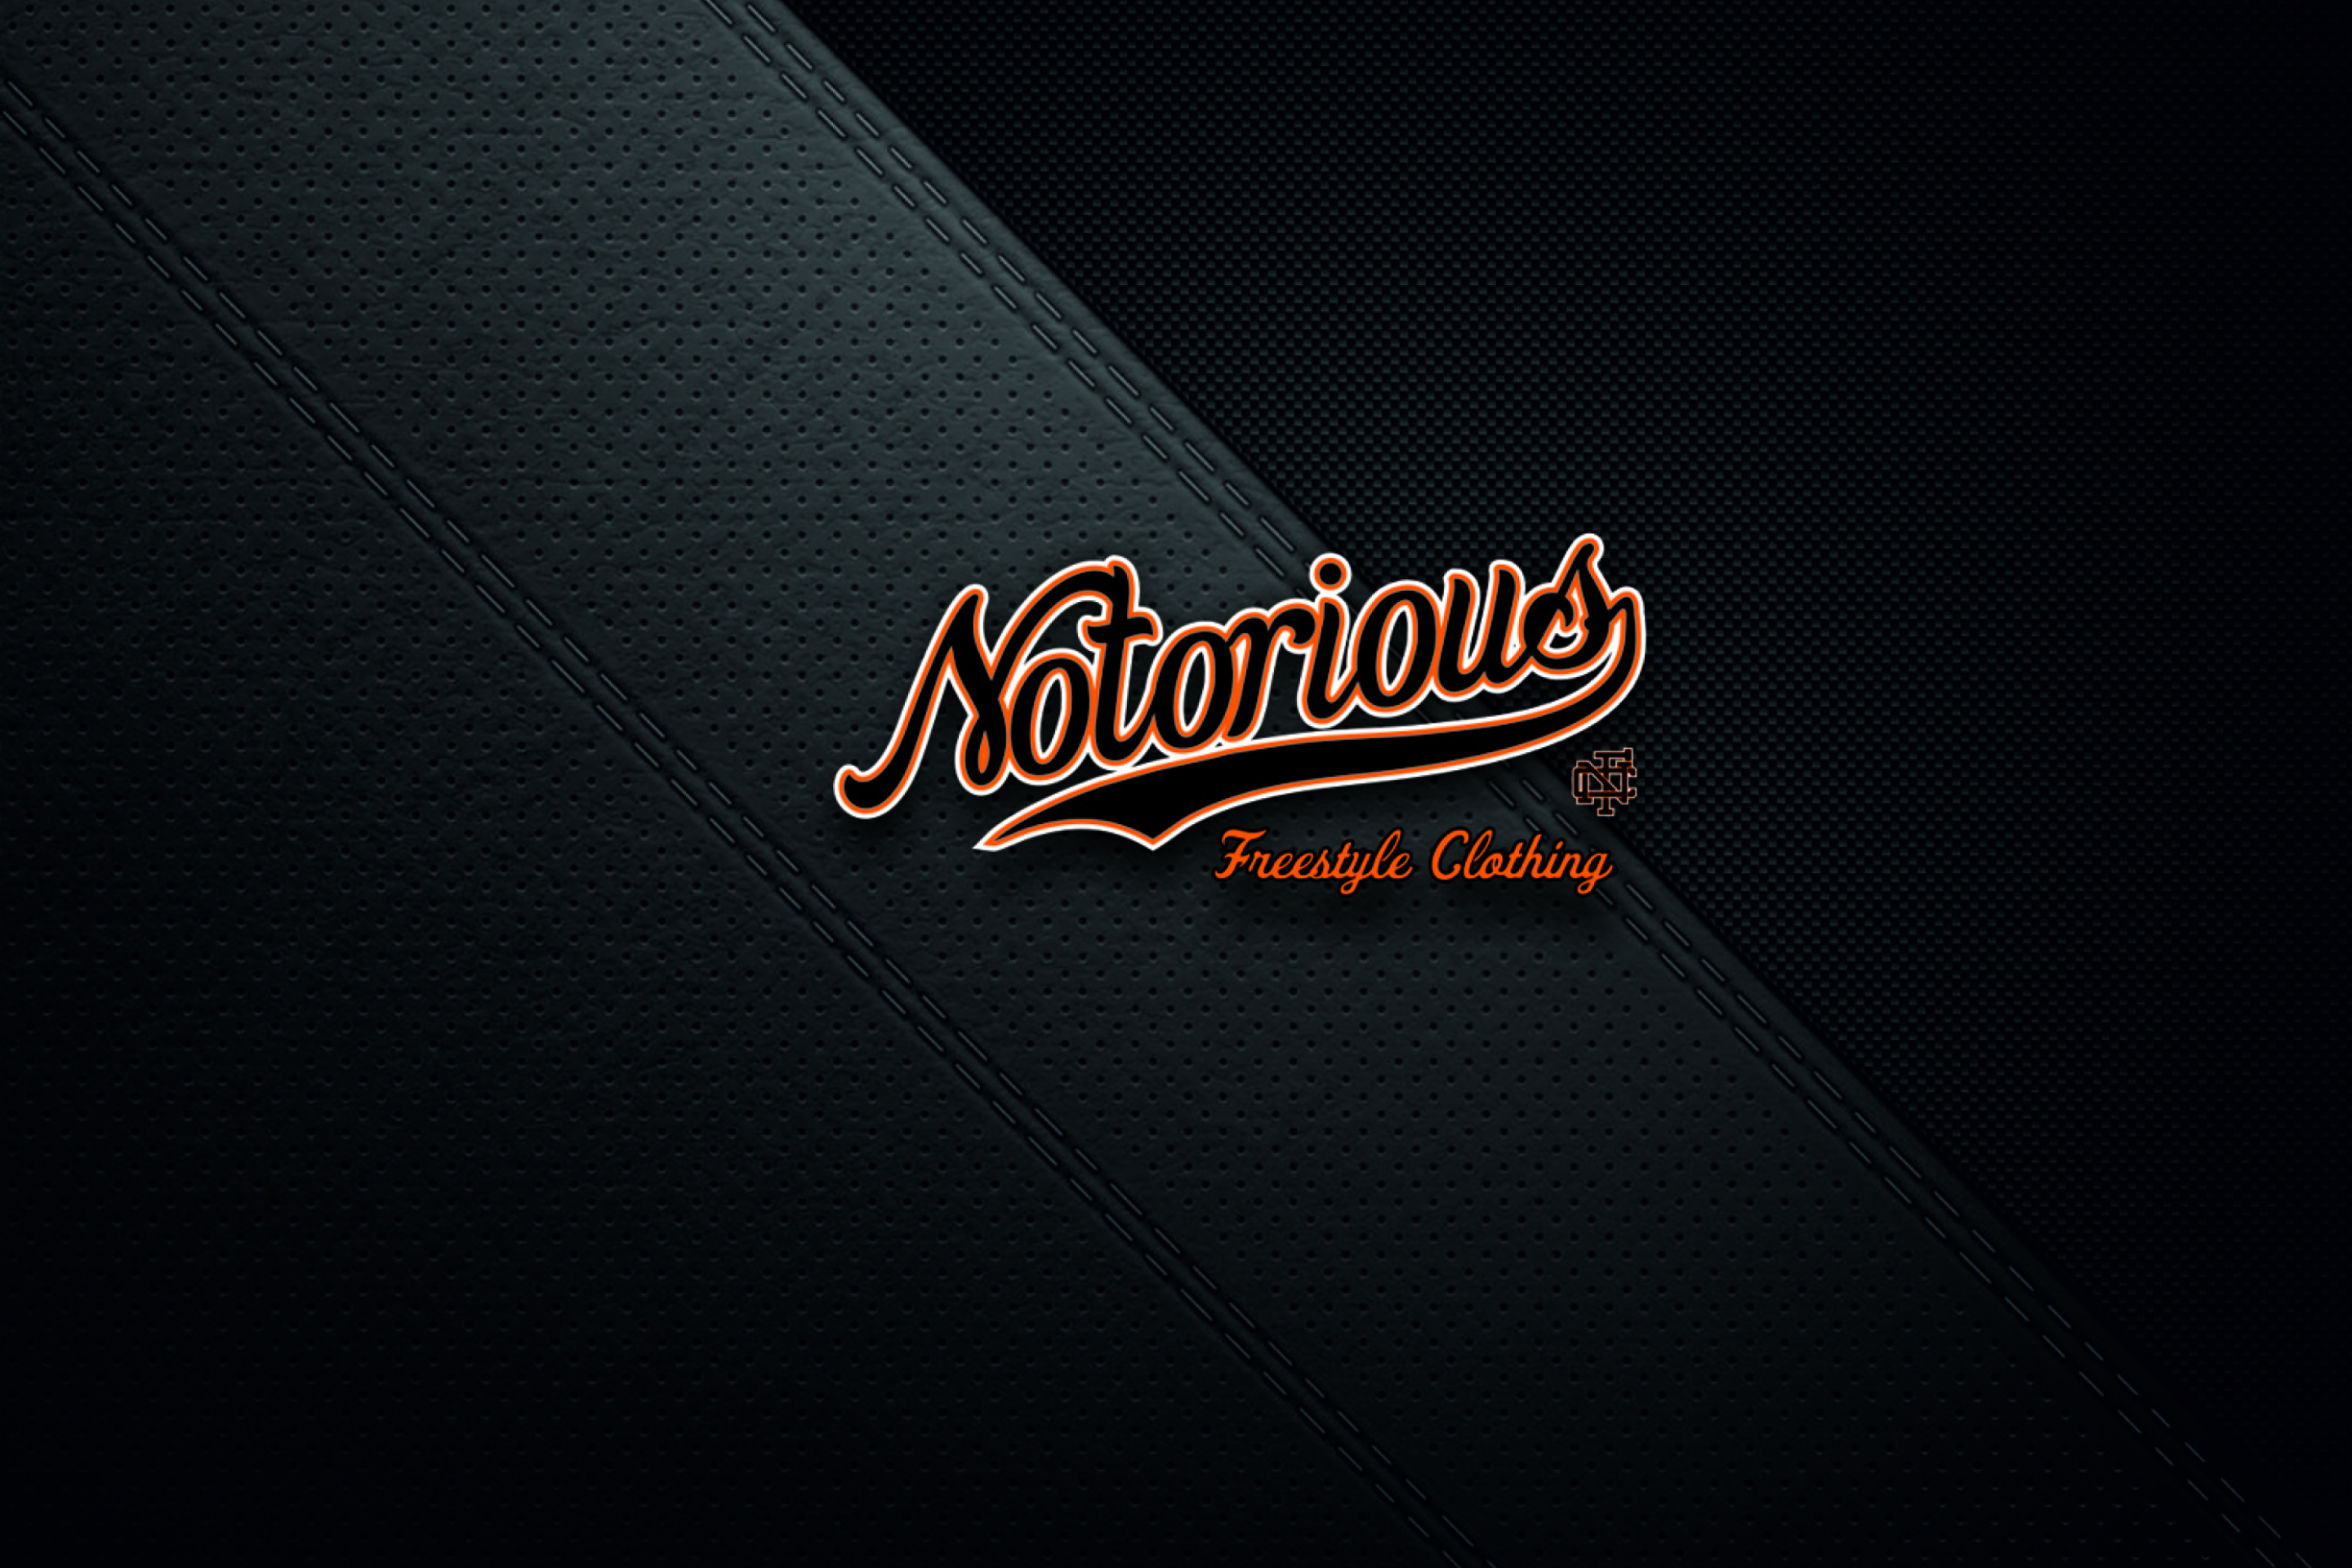 Notorious Freestyle Clothes wallpaper 2880x1920